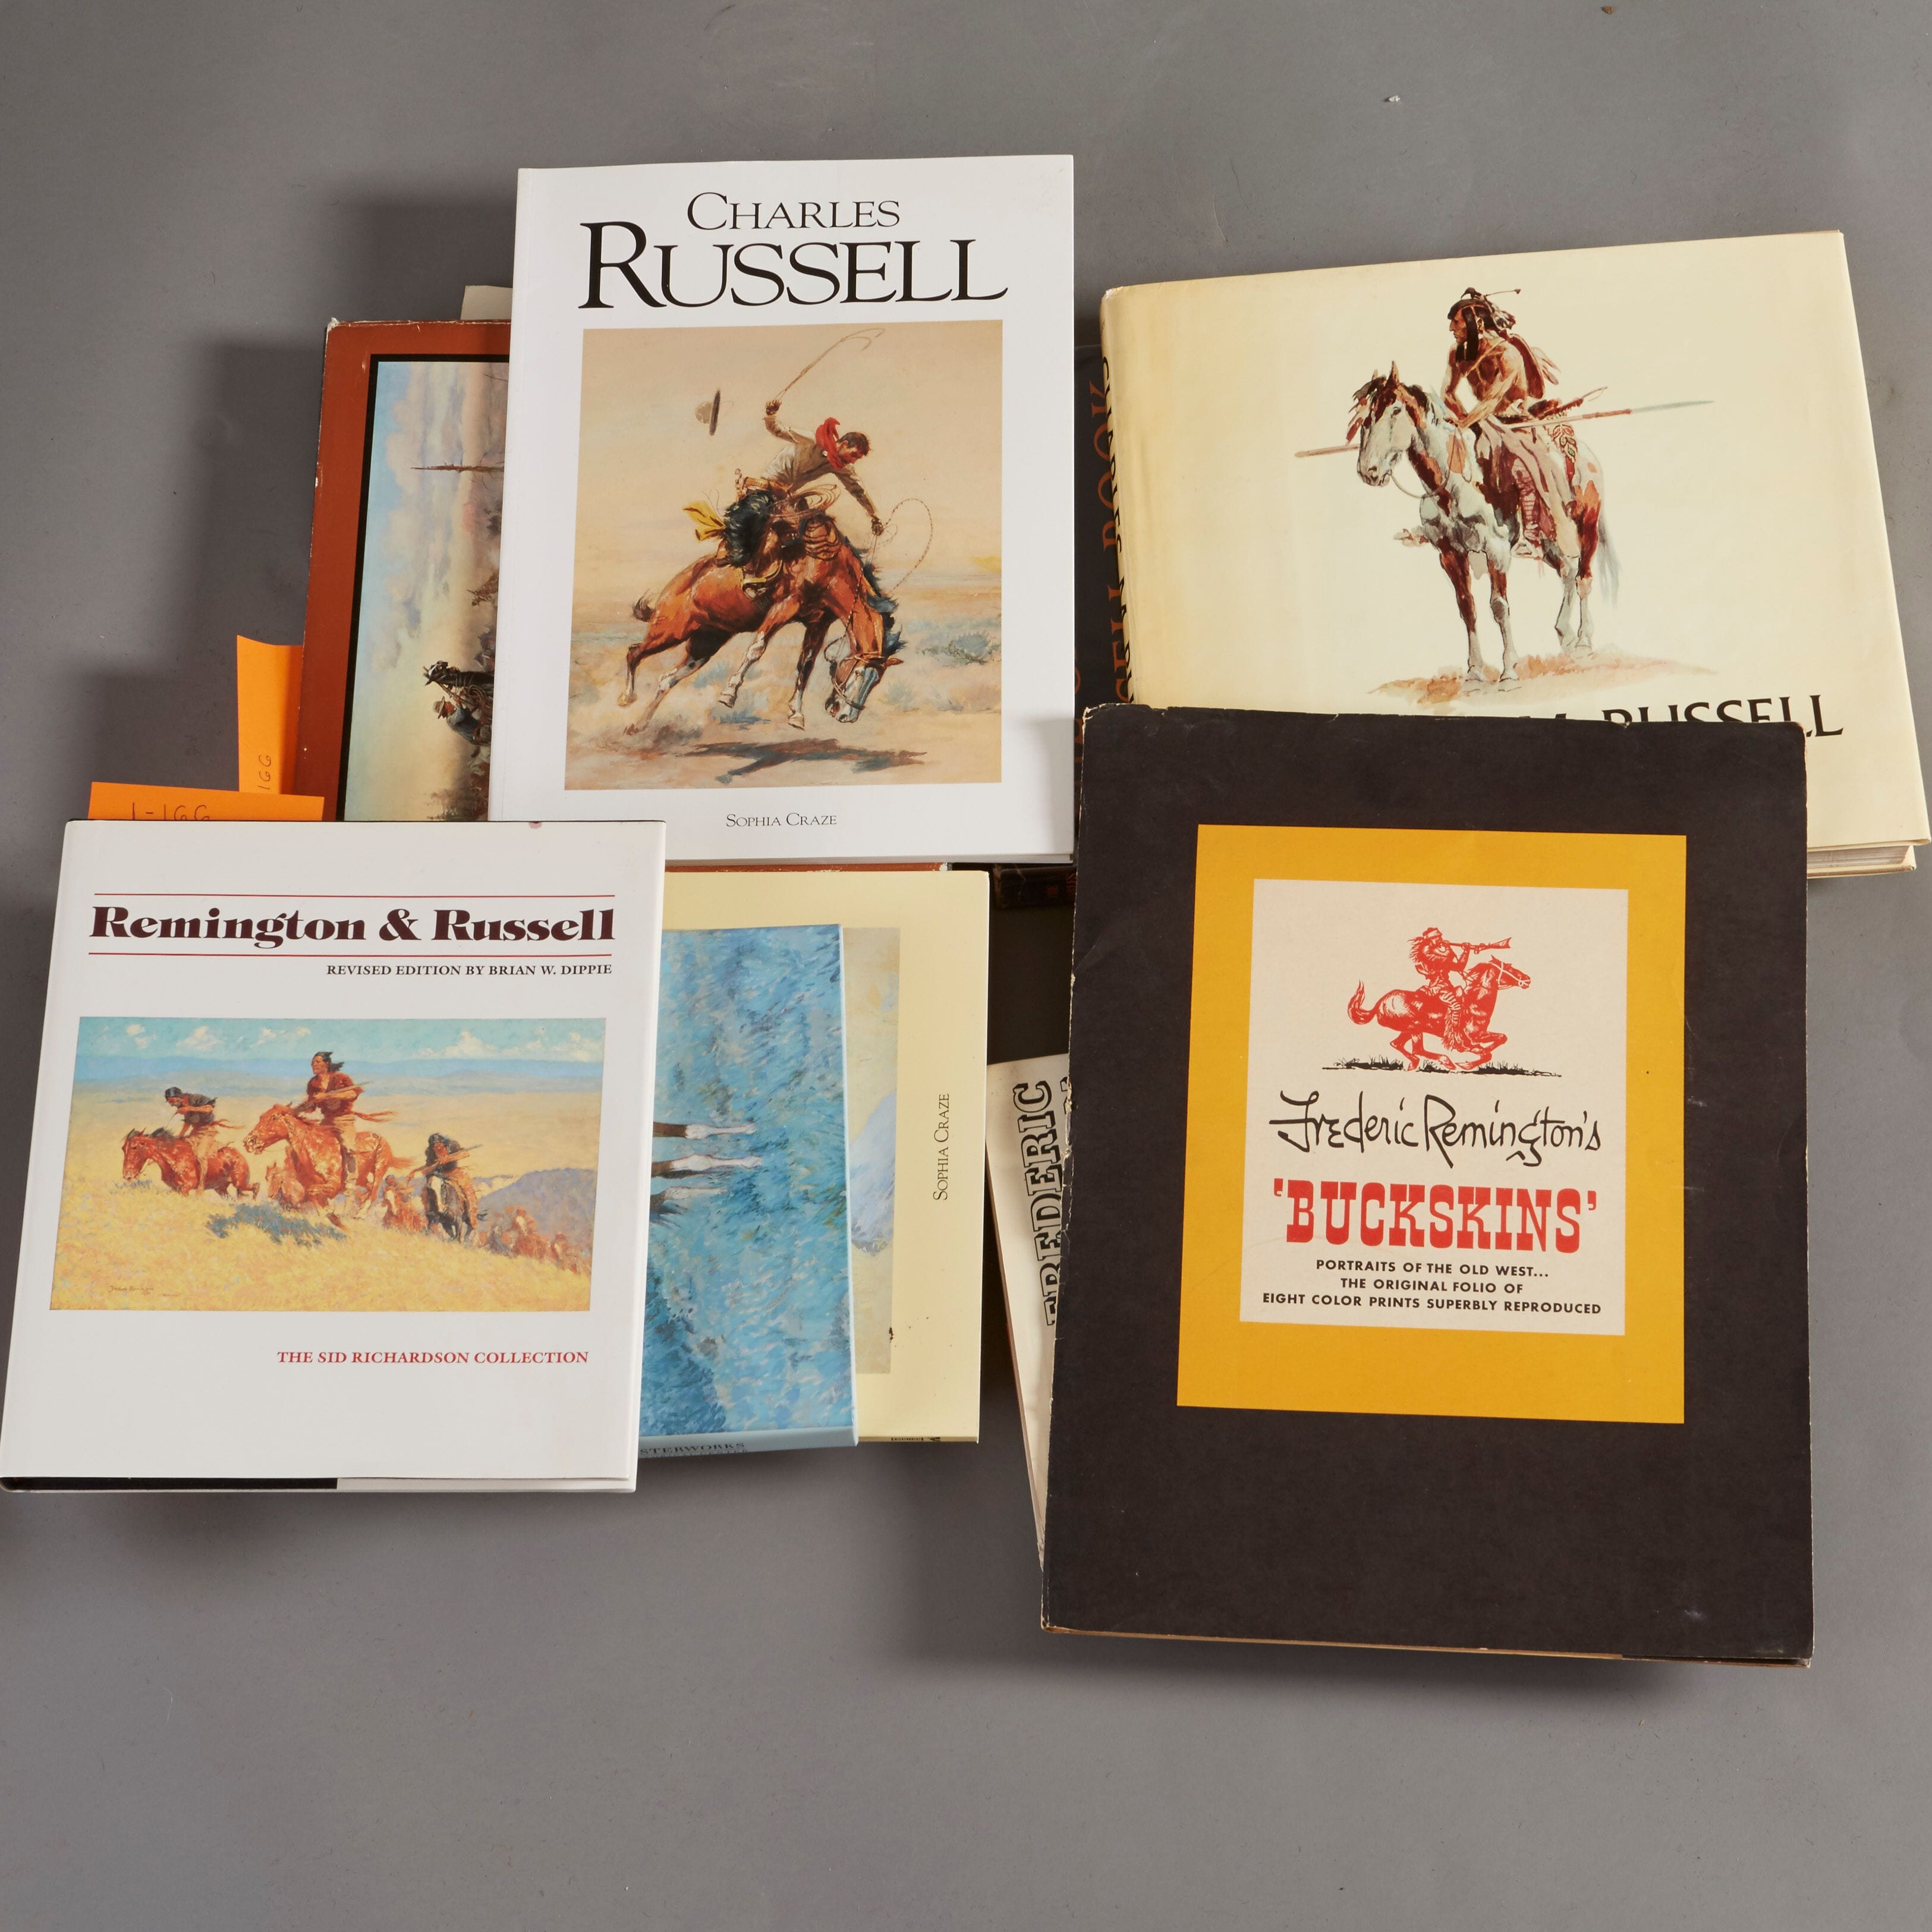 Lot 267: 11 Books about Russell and Remington